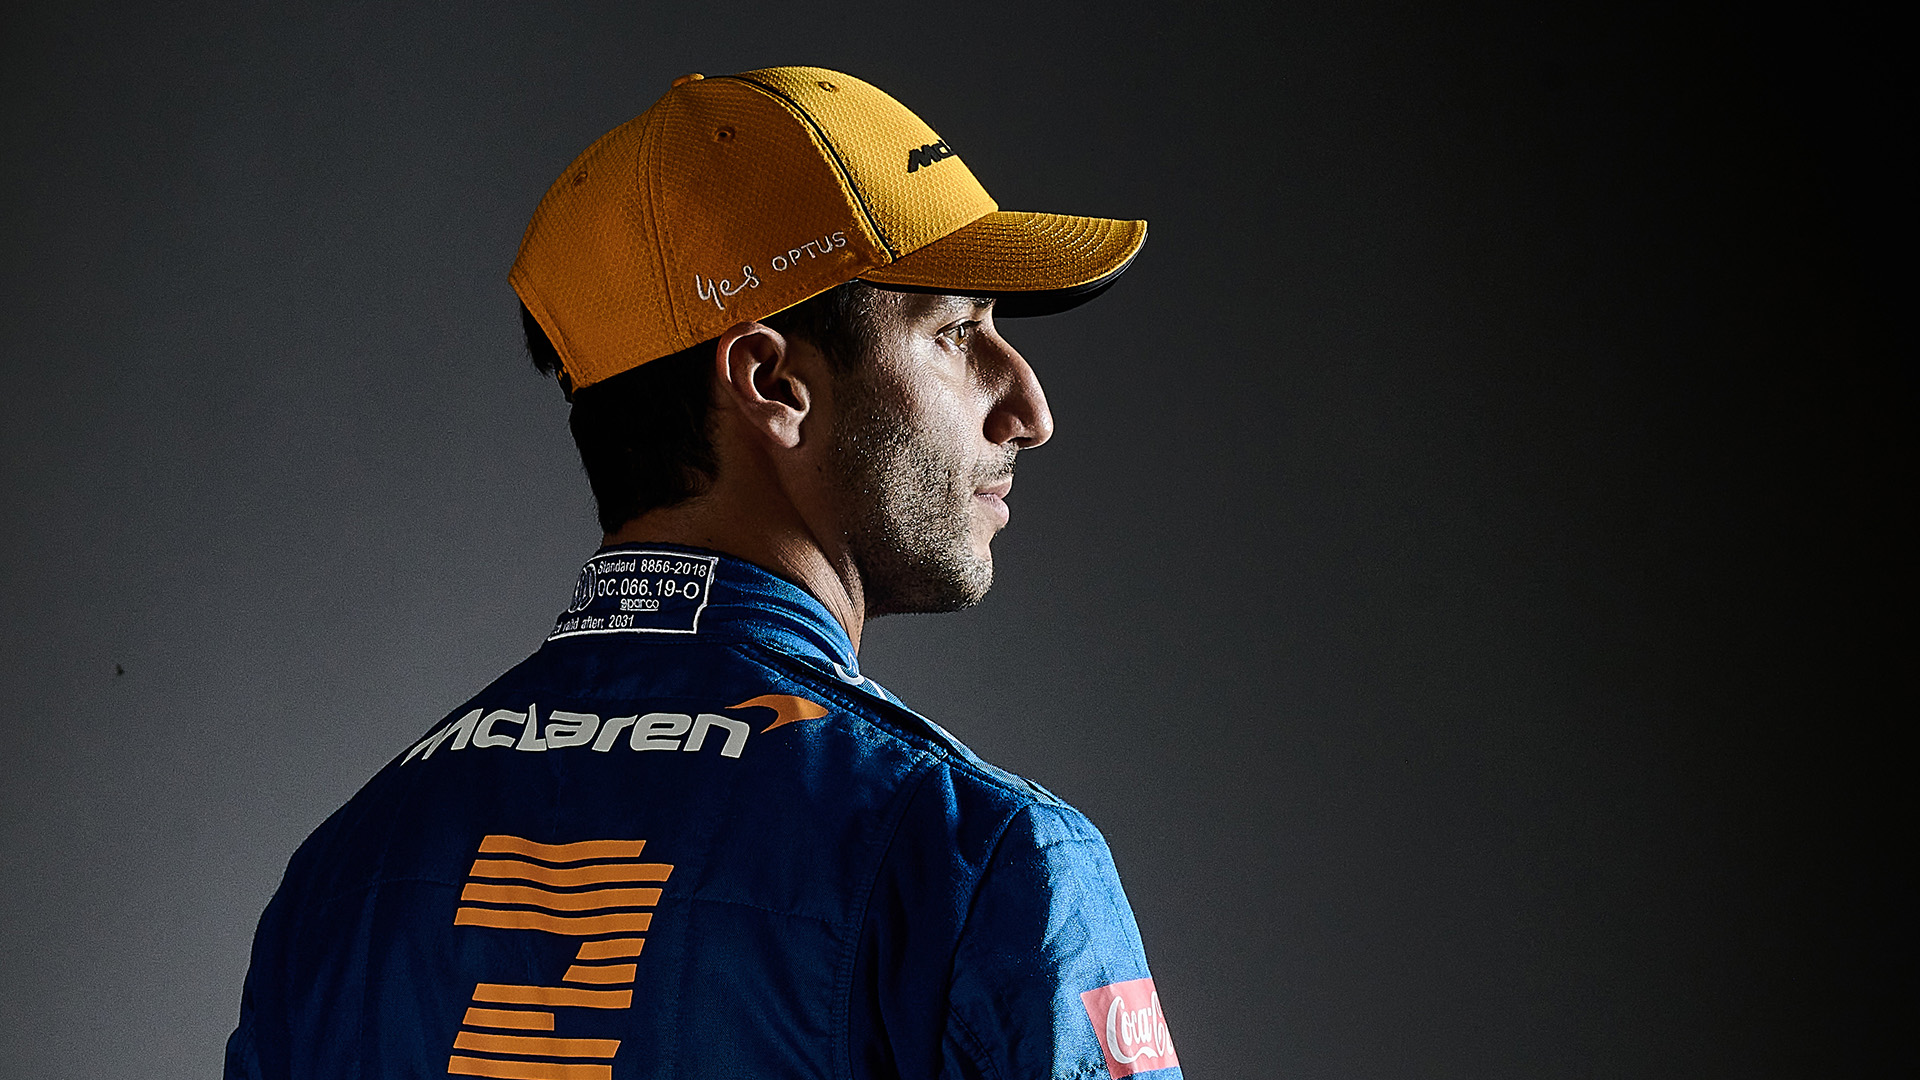 LONG READ: Daniel Ricciardo on adapting to McLaren, partnering Norris, and finding perspective in the bad days. Formula 1®